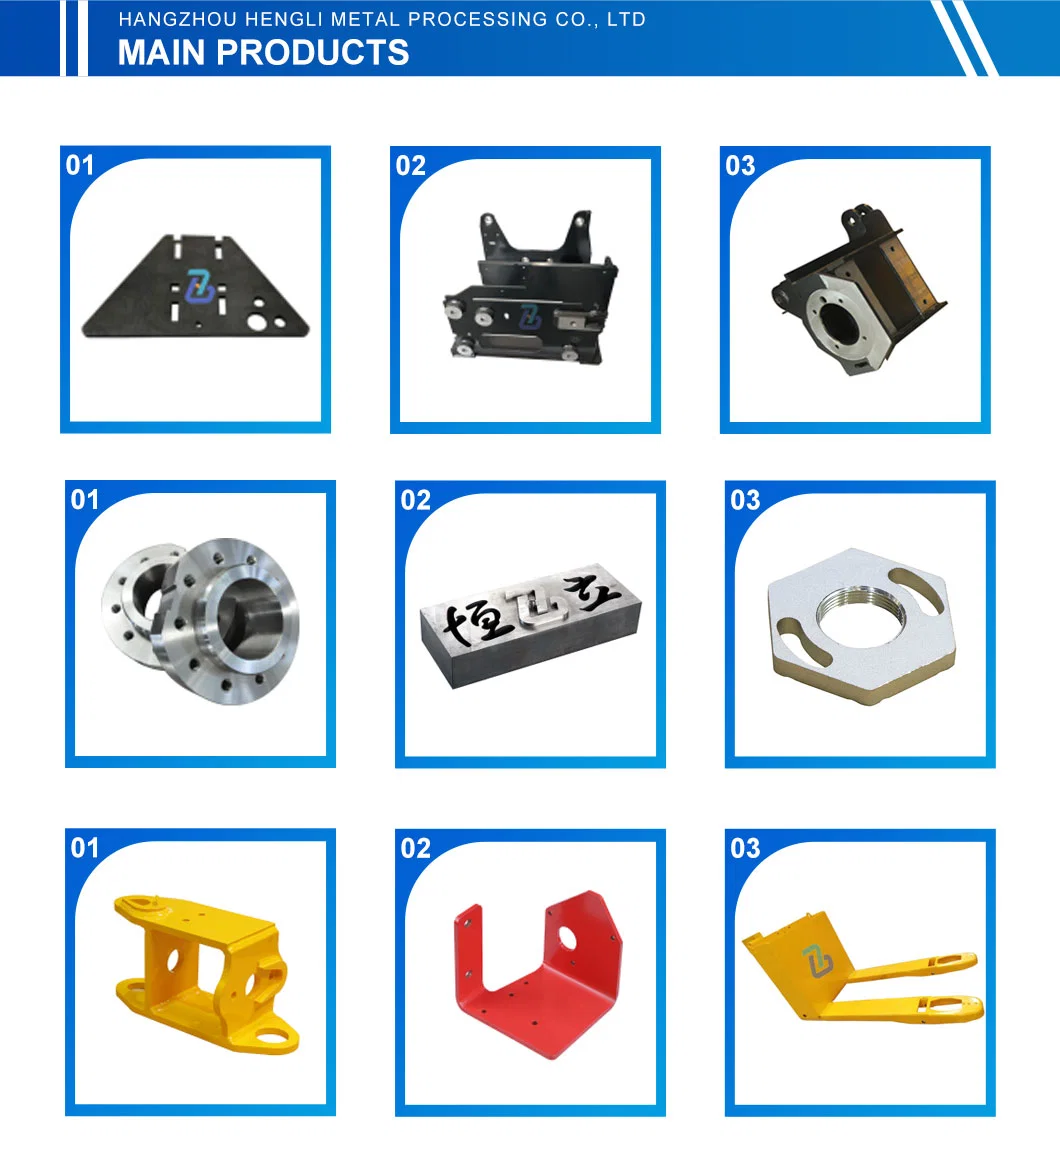 OEM Cutting Parts Products Machine Services Box Welded Bending Stamping Punching CNC Custom Sheet Metal Fabrication